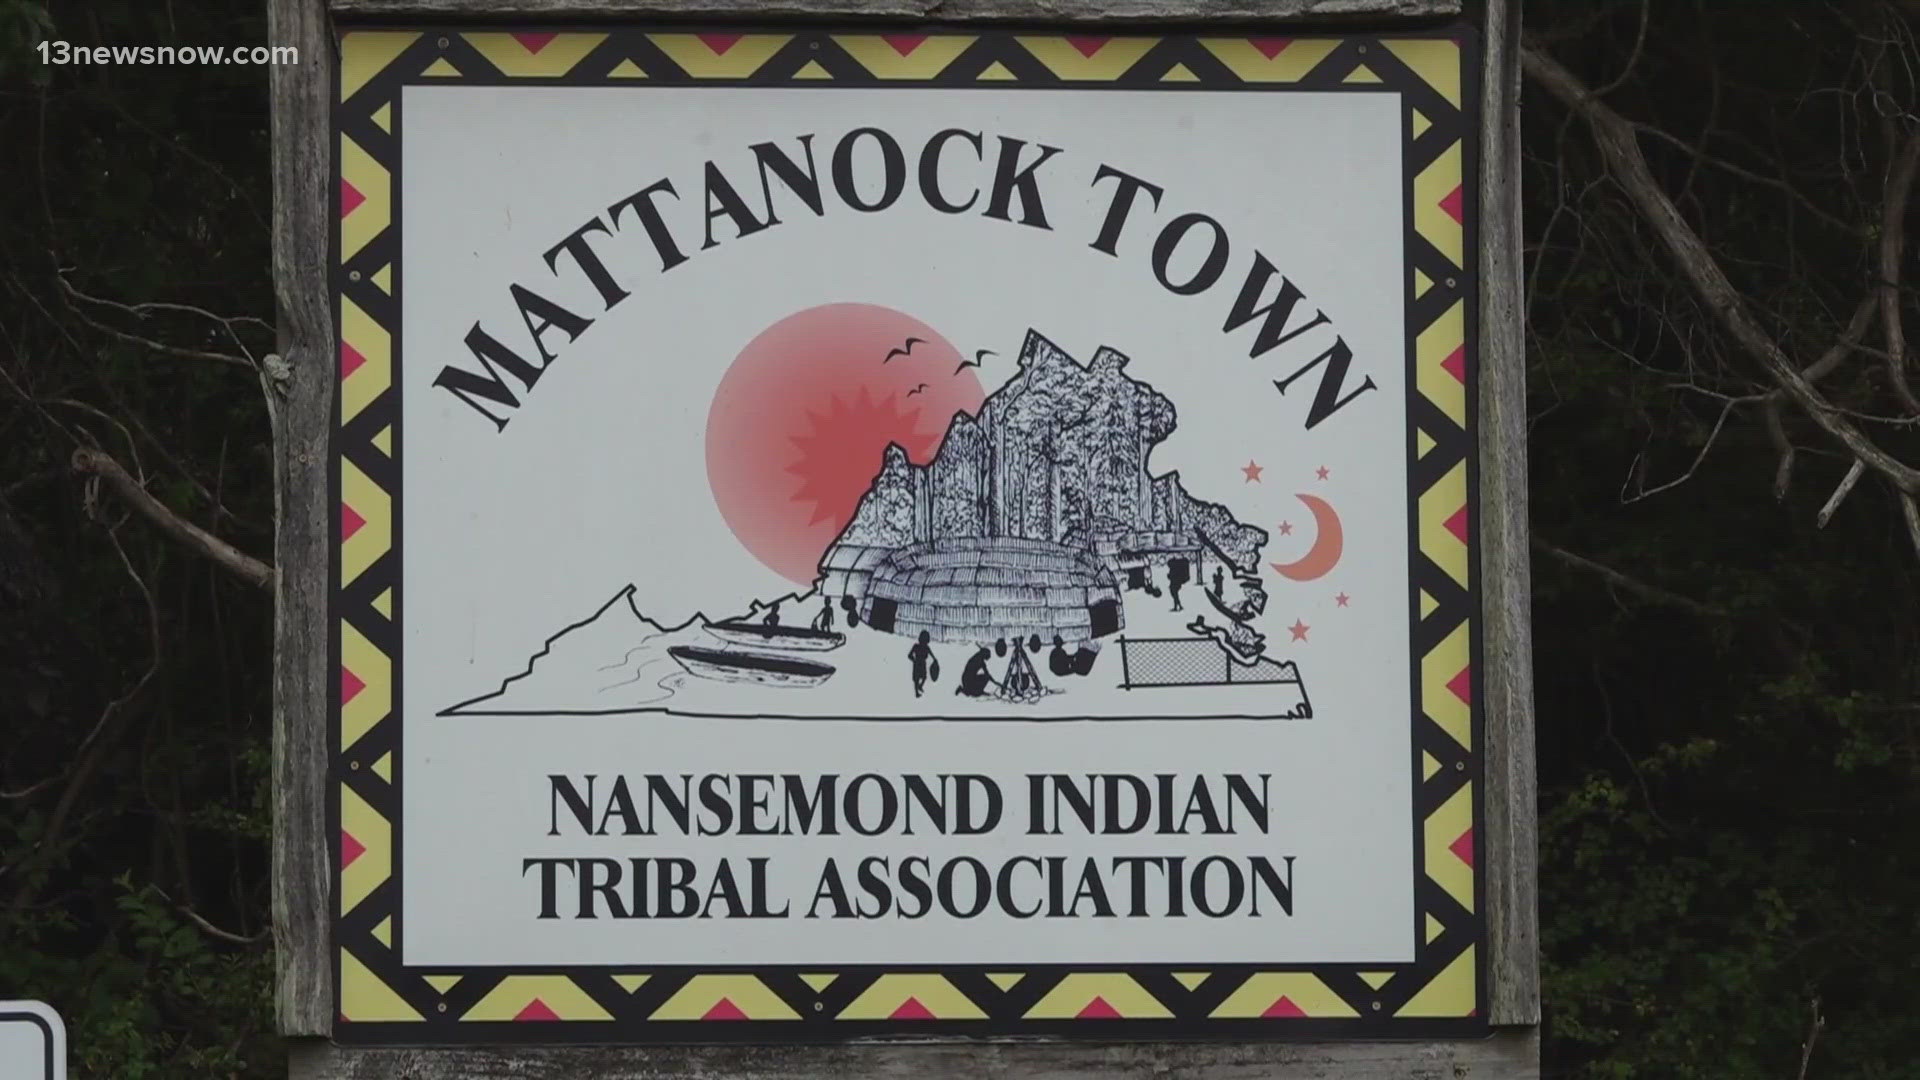 The City of Suffolk will transfer land at Mattanock Town back to the Nansemond Indian Nation.